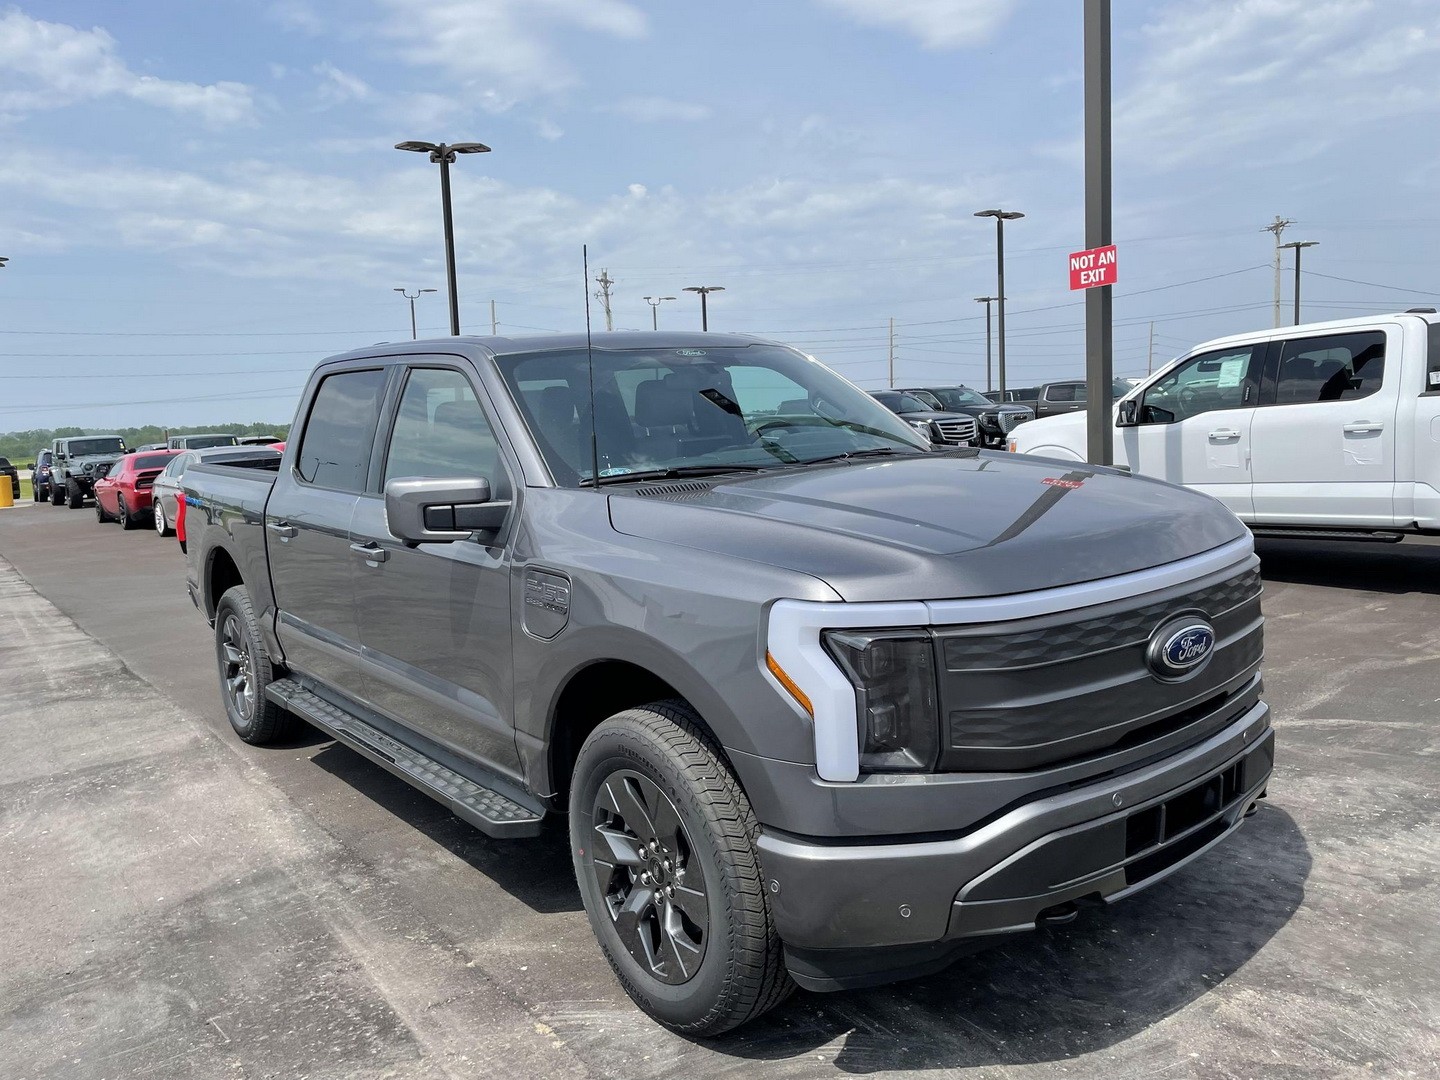 Used 2022 Ford F-150 Lightning Lariat up for Grabs, Has Already Smashed ...